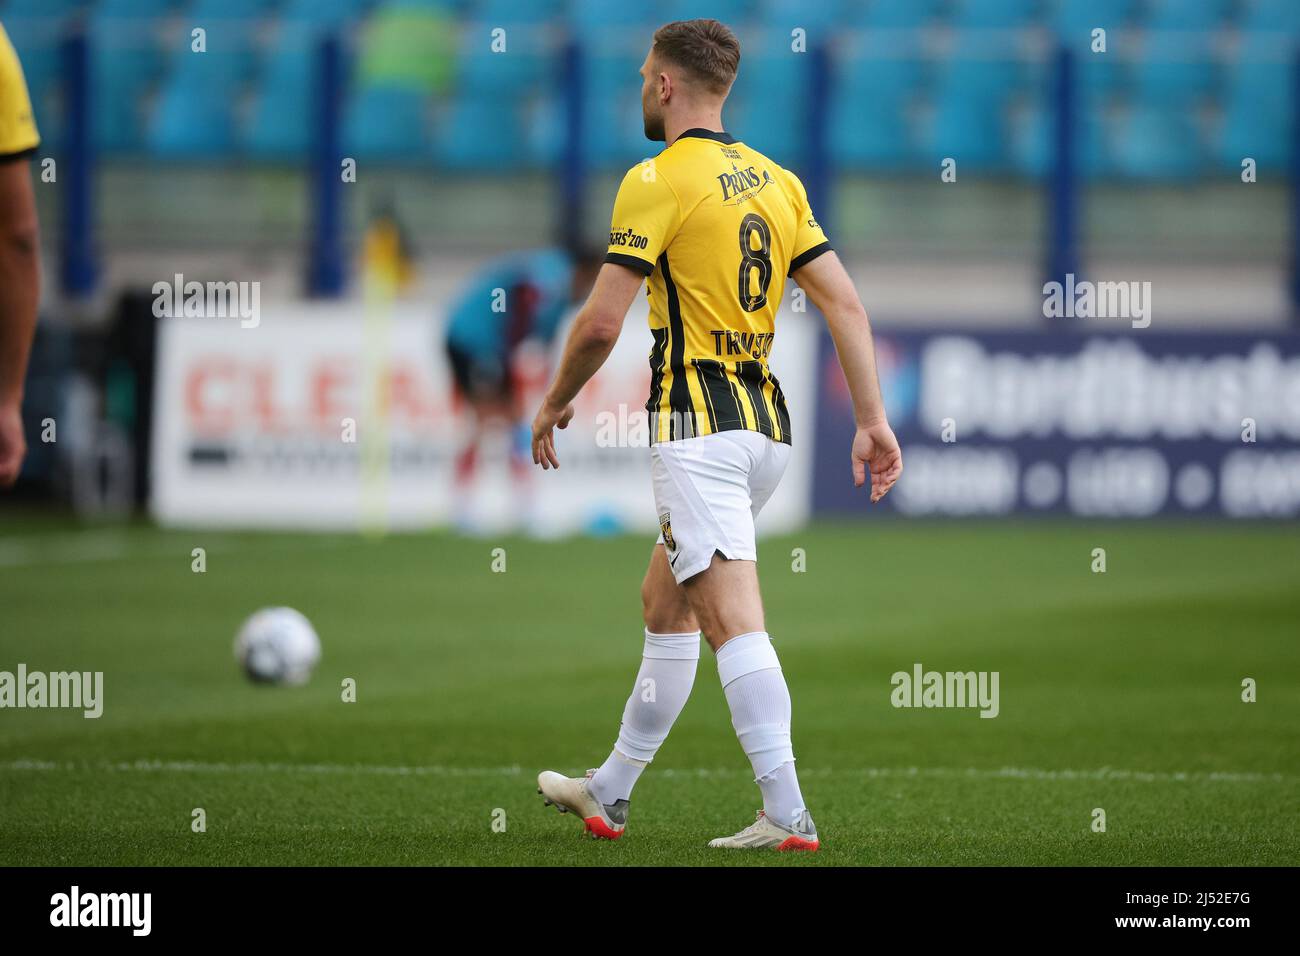 Arnhem, Netherlands. Vitesse, April 19, 2022, ARNHEM - Sondre Tronstad of Vitesse after the Dutch Eredivisie match between Vitesse and Sparta Rotterdam at the Gelredome on April 19, 2022 in Arnhem, the Netherlands. Vitesse - Sparta was suspended in injury time on March 4 after misconduct by the home crowd. ANP JEROEN PUTMANS Stock Photo